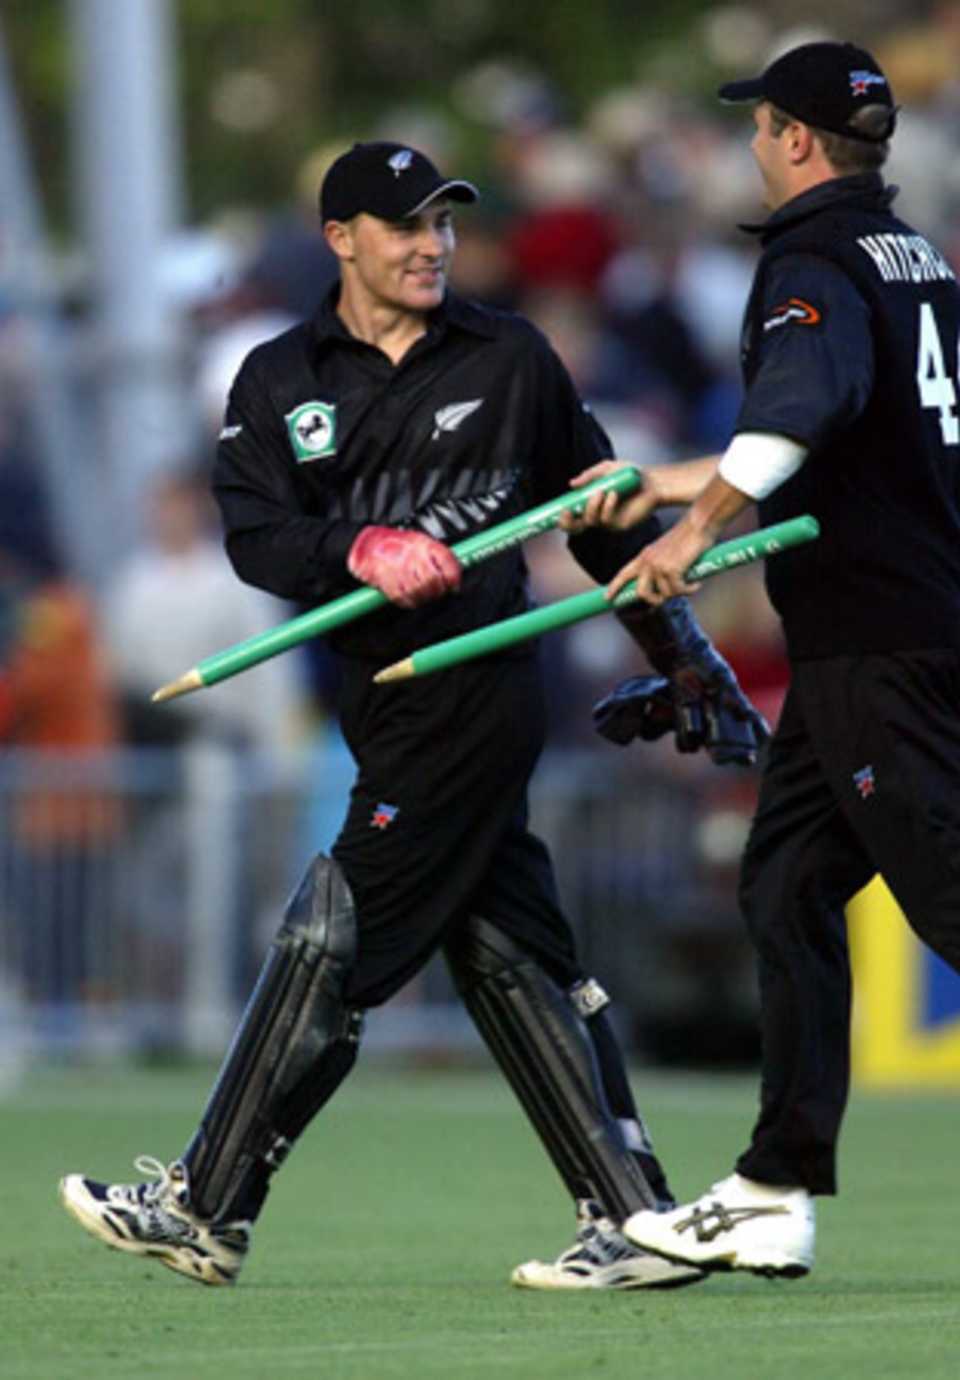 New Zealand player Paul Hitchcock (right) hands wicket-keeper Brendon McCullum a stump as they leave the field after winning the match. 2nd ODI: New Zealand v India at McLean Park, Napier, 29 December 2002.